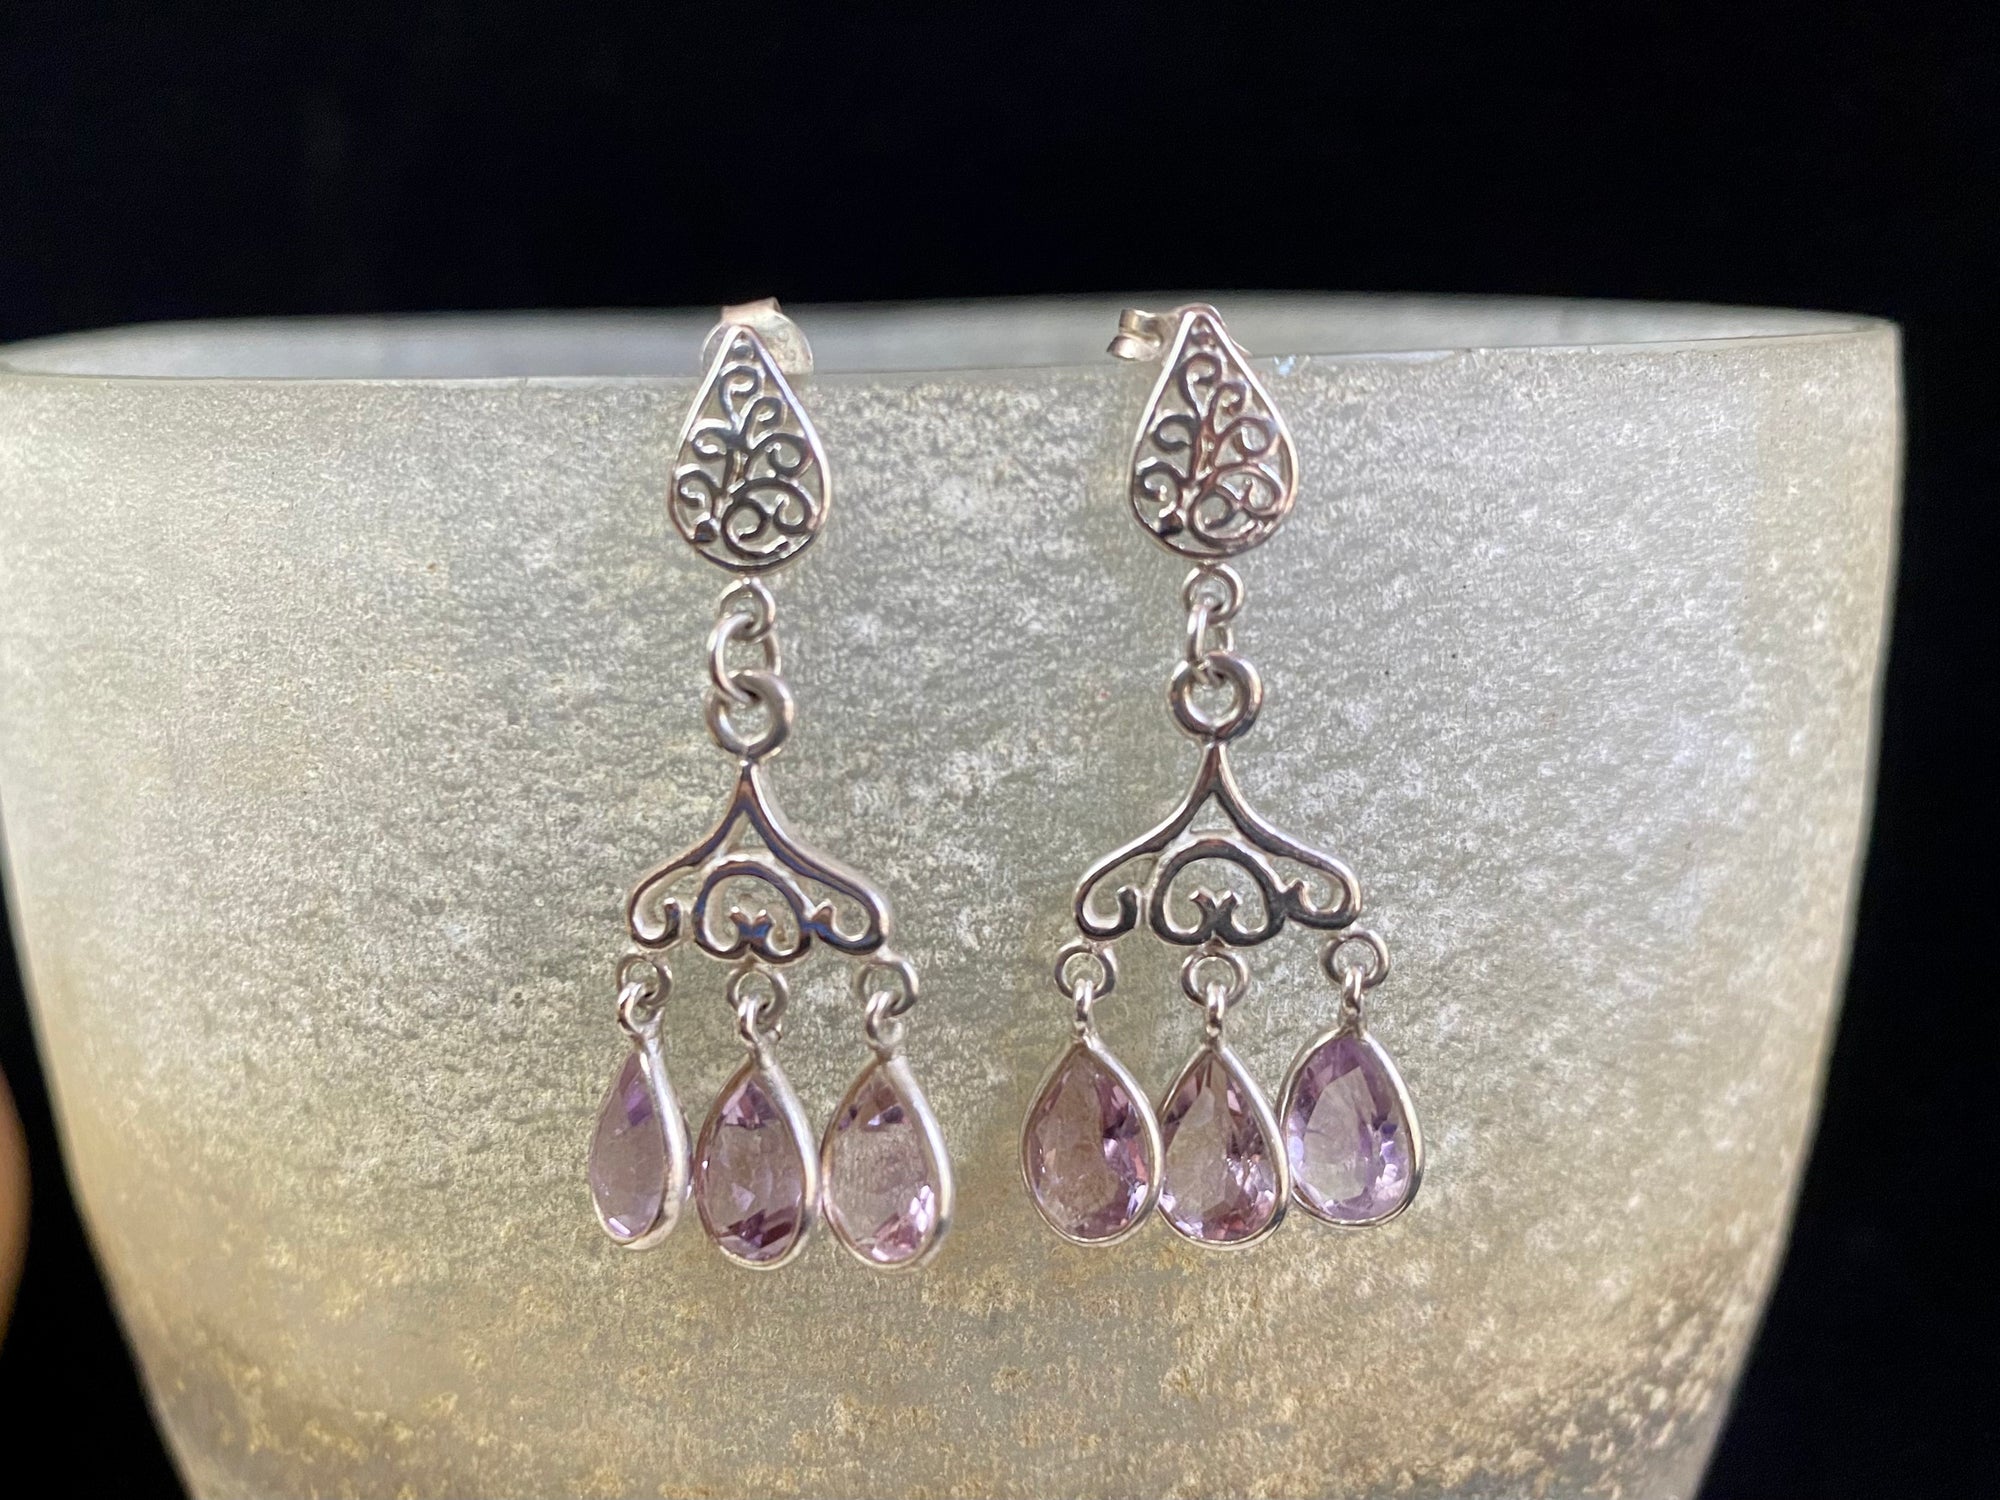 Amethyst chandelier earrings set in filigree silver with a post and butterfly back attachment. The matching light purple teardrop shape amethyst stones are facet cut to display their excellent quality and sparkle as they move en tremblant.